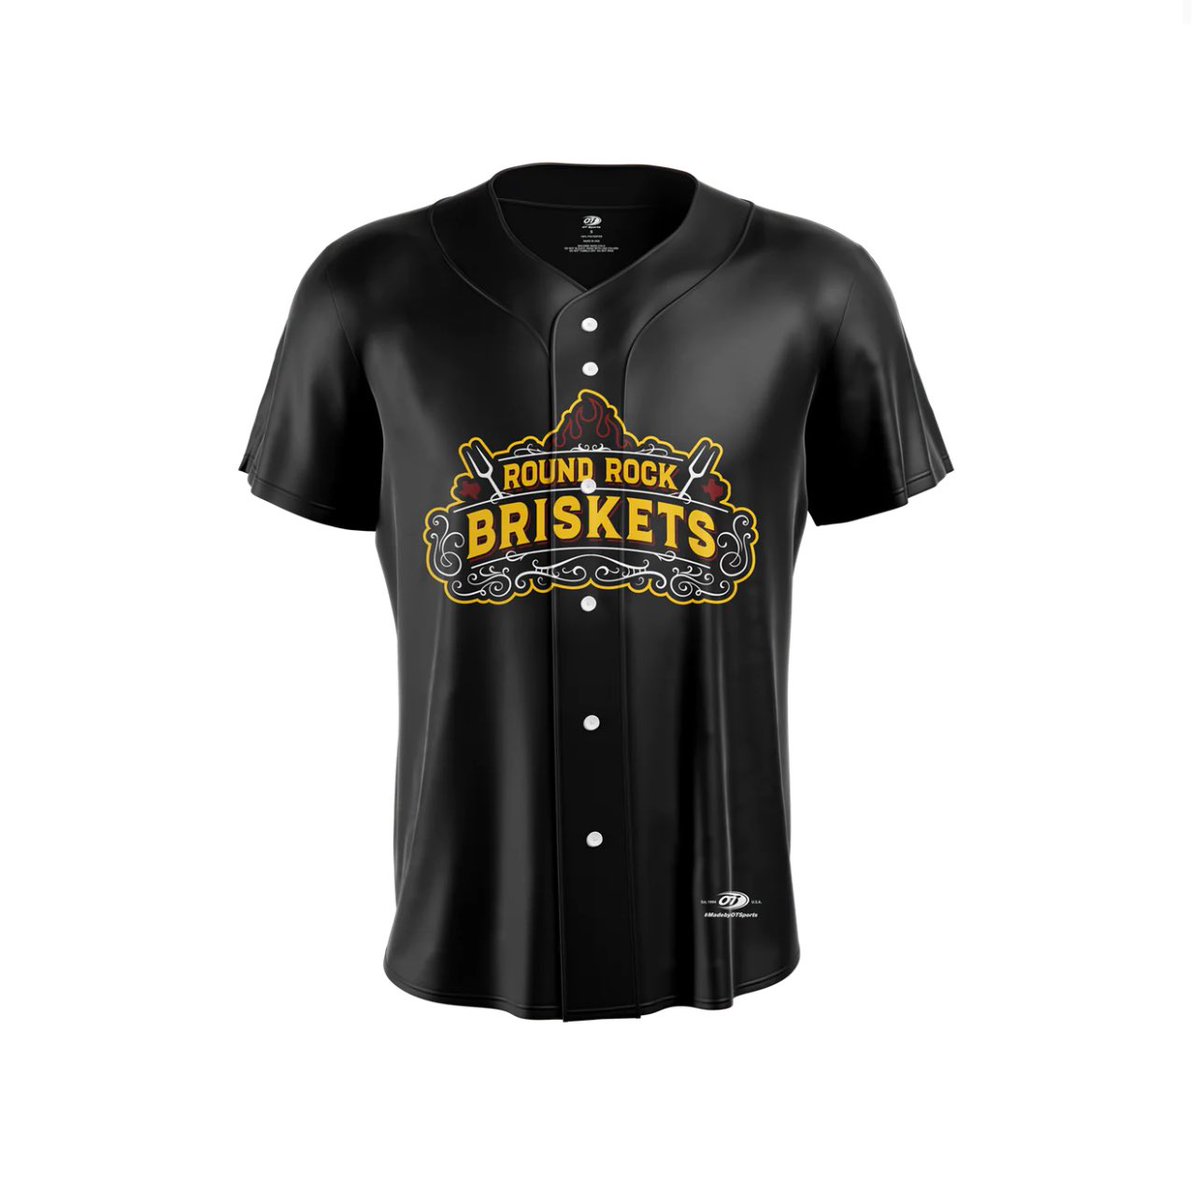 Round Rock Briskets merch is pretty sweet except the jersey that looks like it was designed for Batman